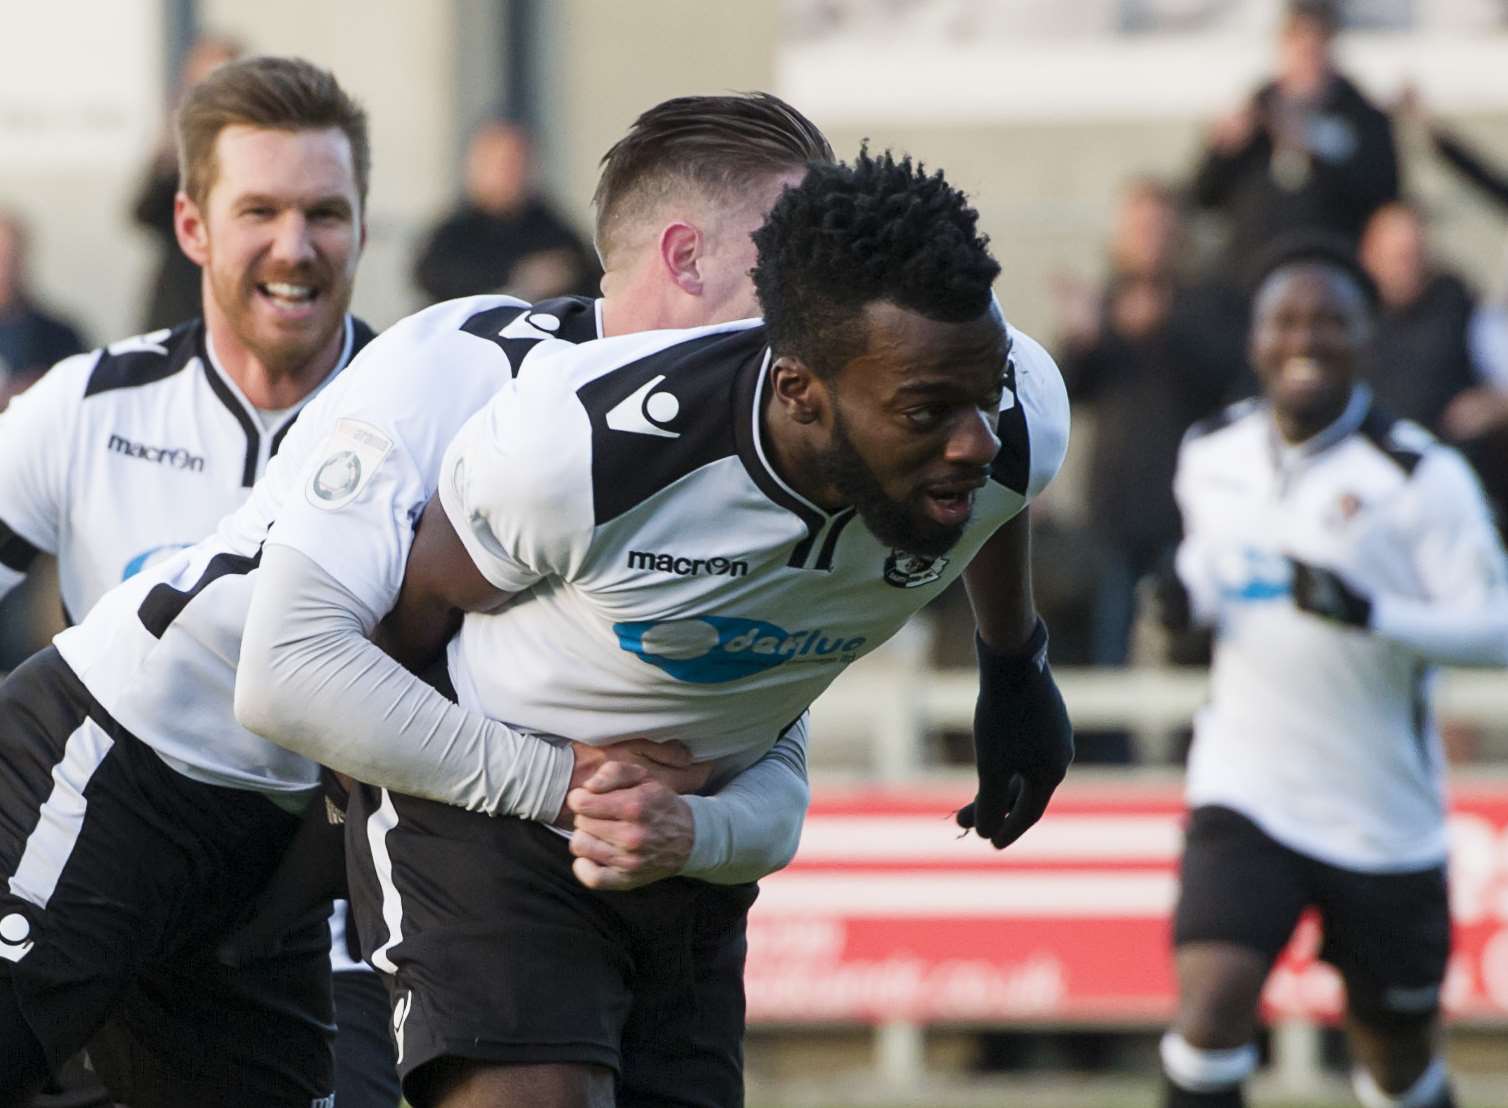 Duane Ofori-Acheampong celebrates after scoring the opening goal against Poole Pic: Andy Payton